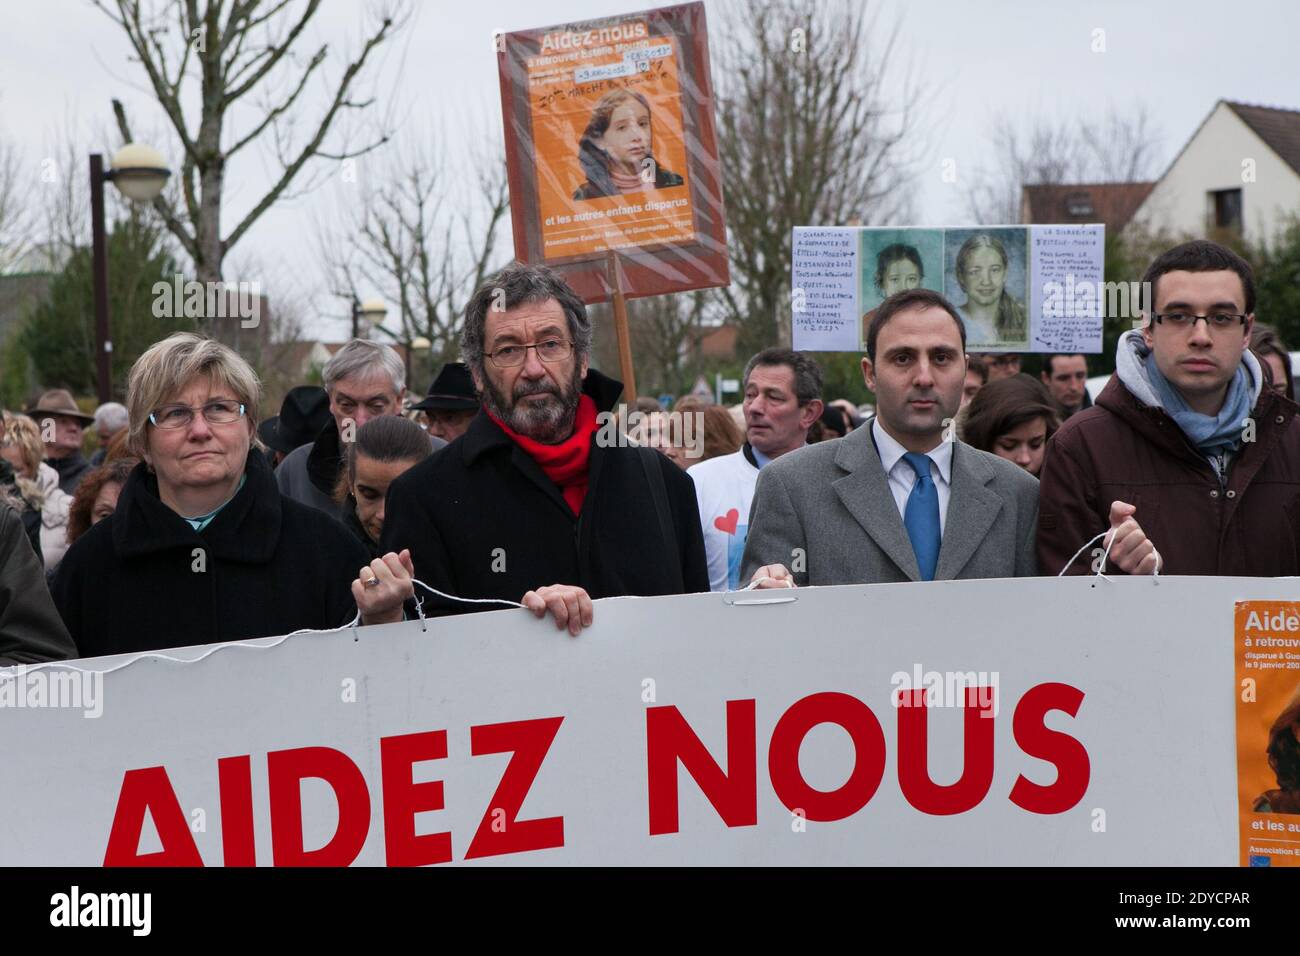 Eric Mouzin, the father of missing Estelle Mouzin participates in a march in memory of his daughter in Guermantes, France on January 13, 2013. Estelle, aged 9, disappeared on her way home from school on Thursday 9th January, 2003. Photo by Audrey Poree/ABACAPRESS.COM Stock Photo